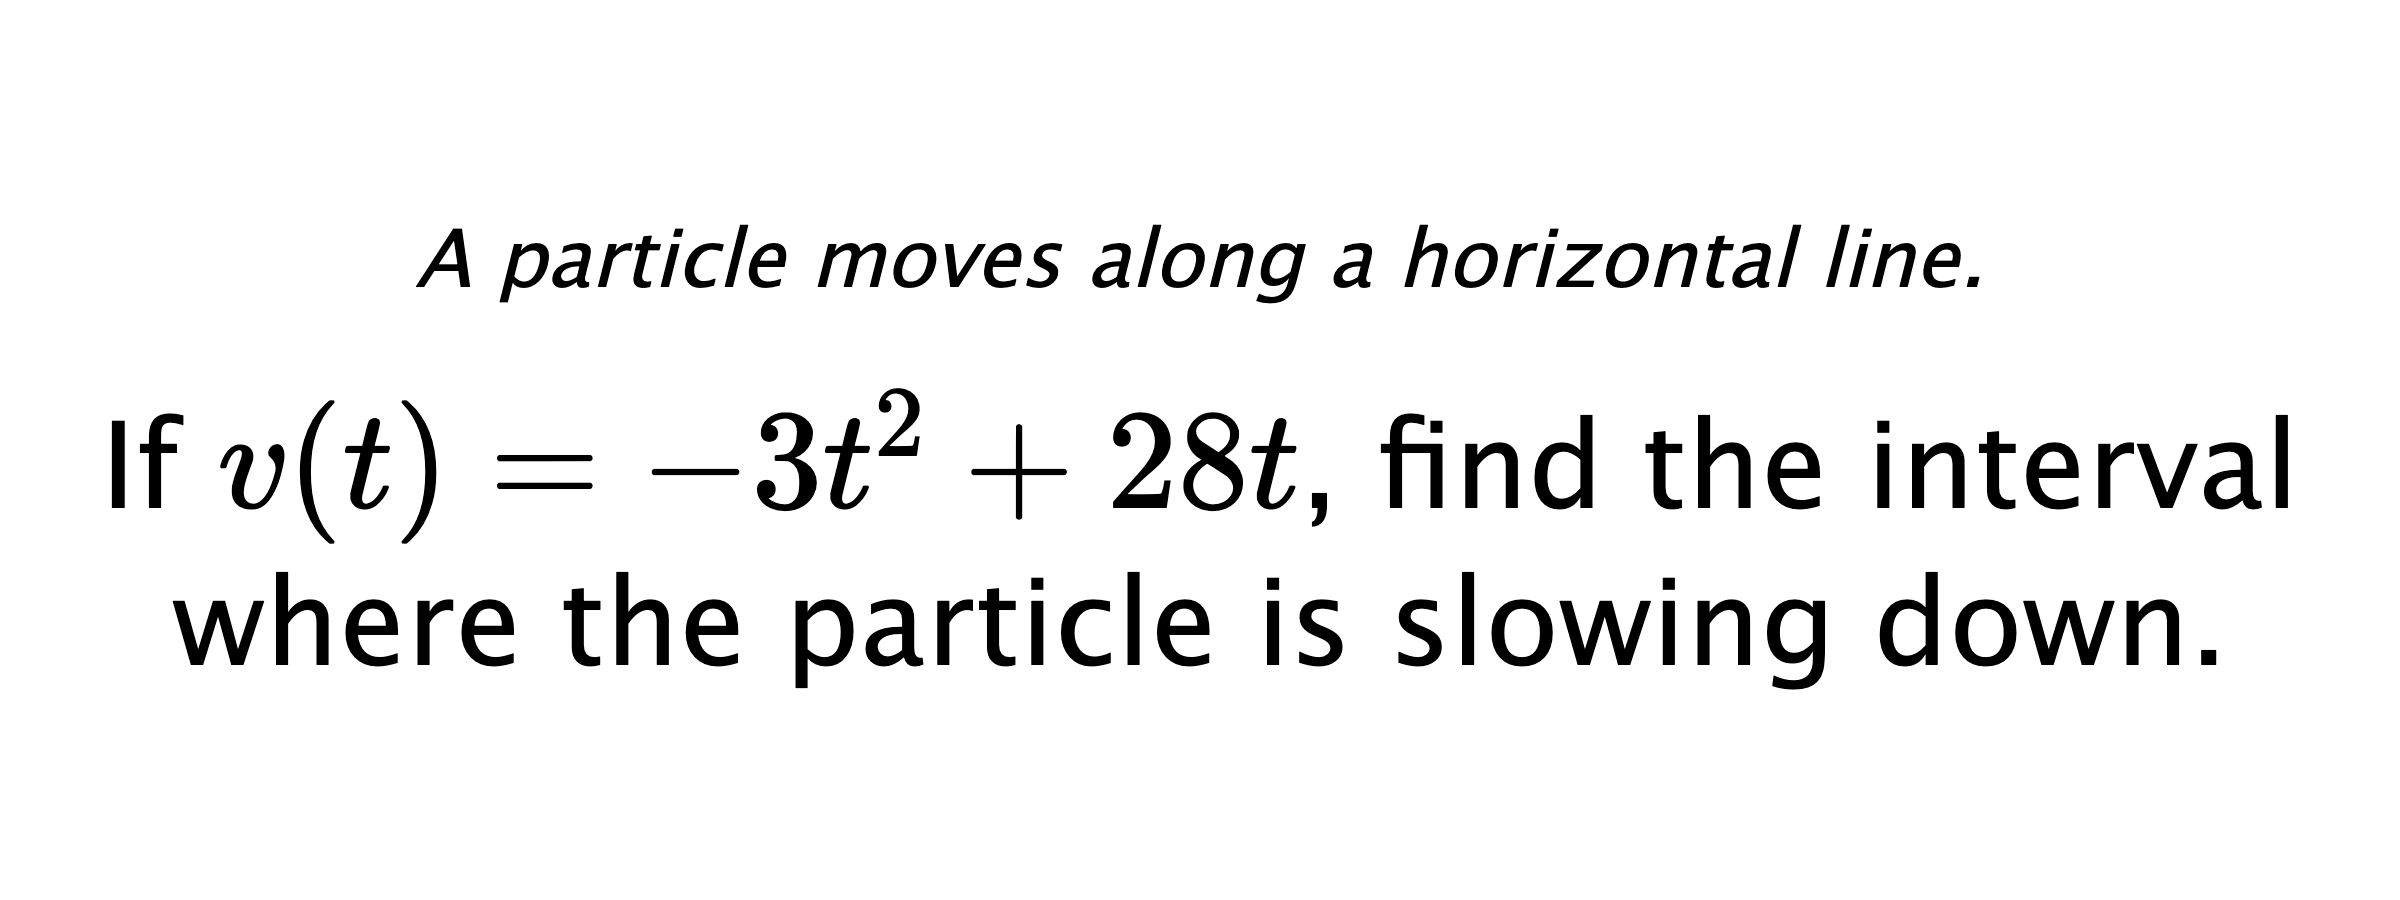 A particle moves along a horizontal line. If $ v(t)=-3t^2+28t $, find the interval where the particle is slowing down.